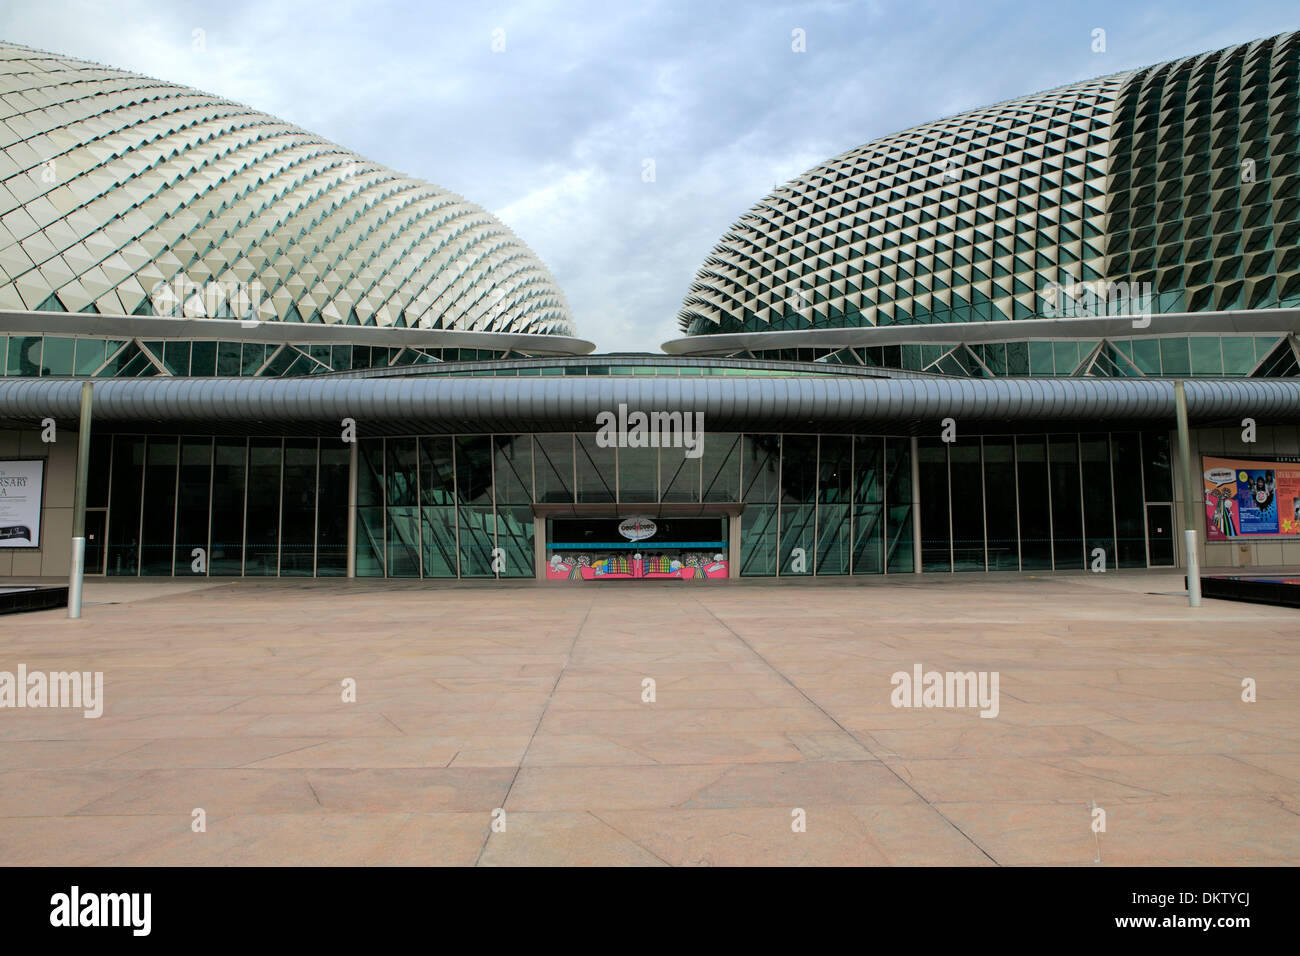 Esplanade Theatres on the Bay (1994-2002, DP Architects, Michael Wilford & Partners), Singapur Foto de stock